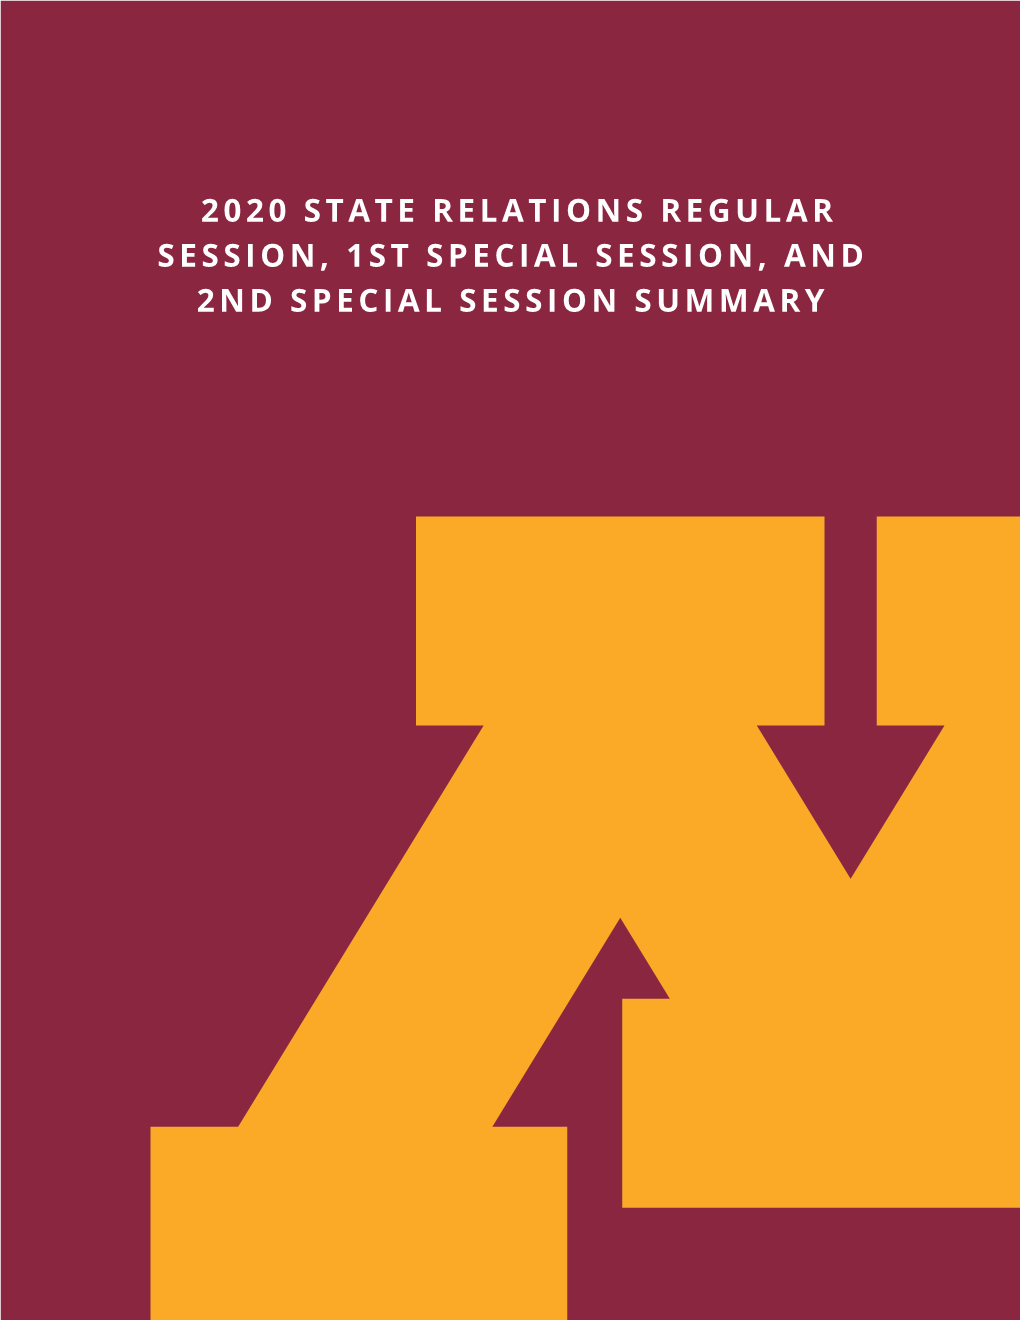 2020 State Relations Regular Session, 1St Special Session, and 2Nd Special Session Summary